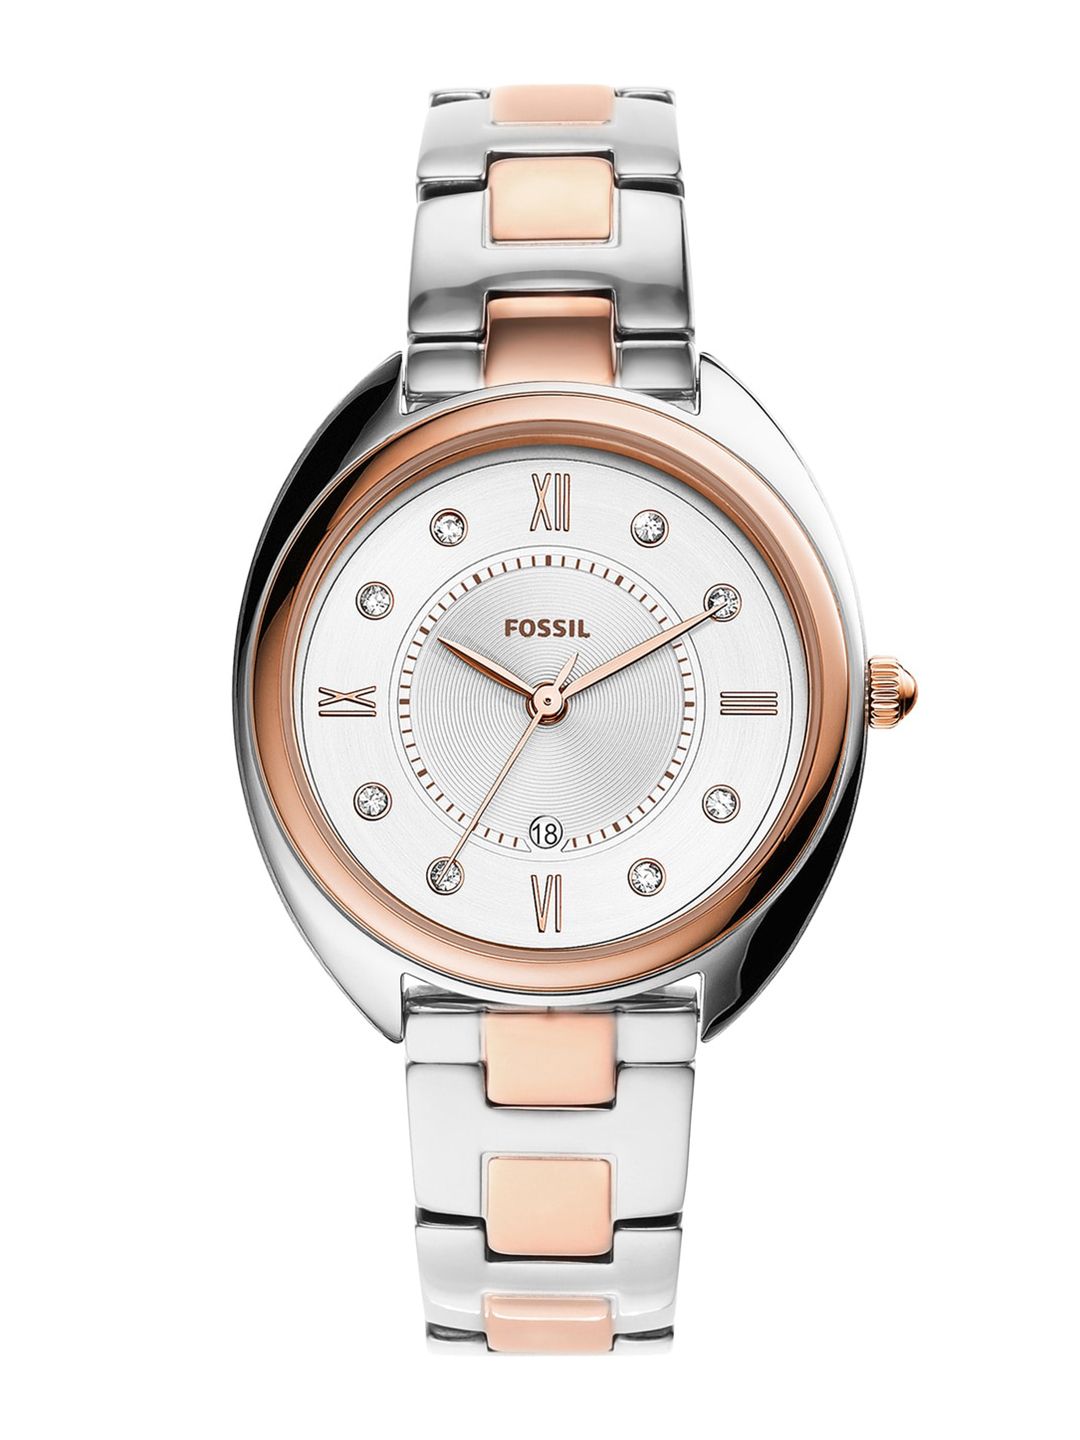 Fossil Women Silver-Toned Analogue Watch ES5072 Price in India